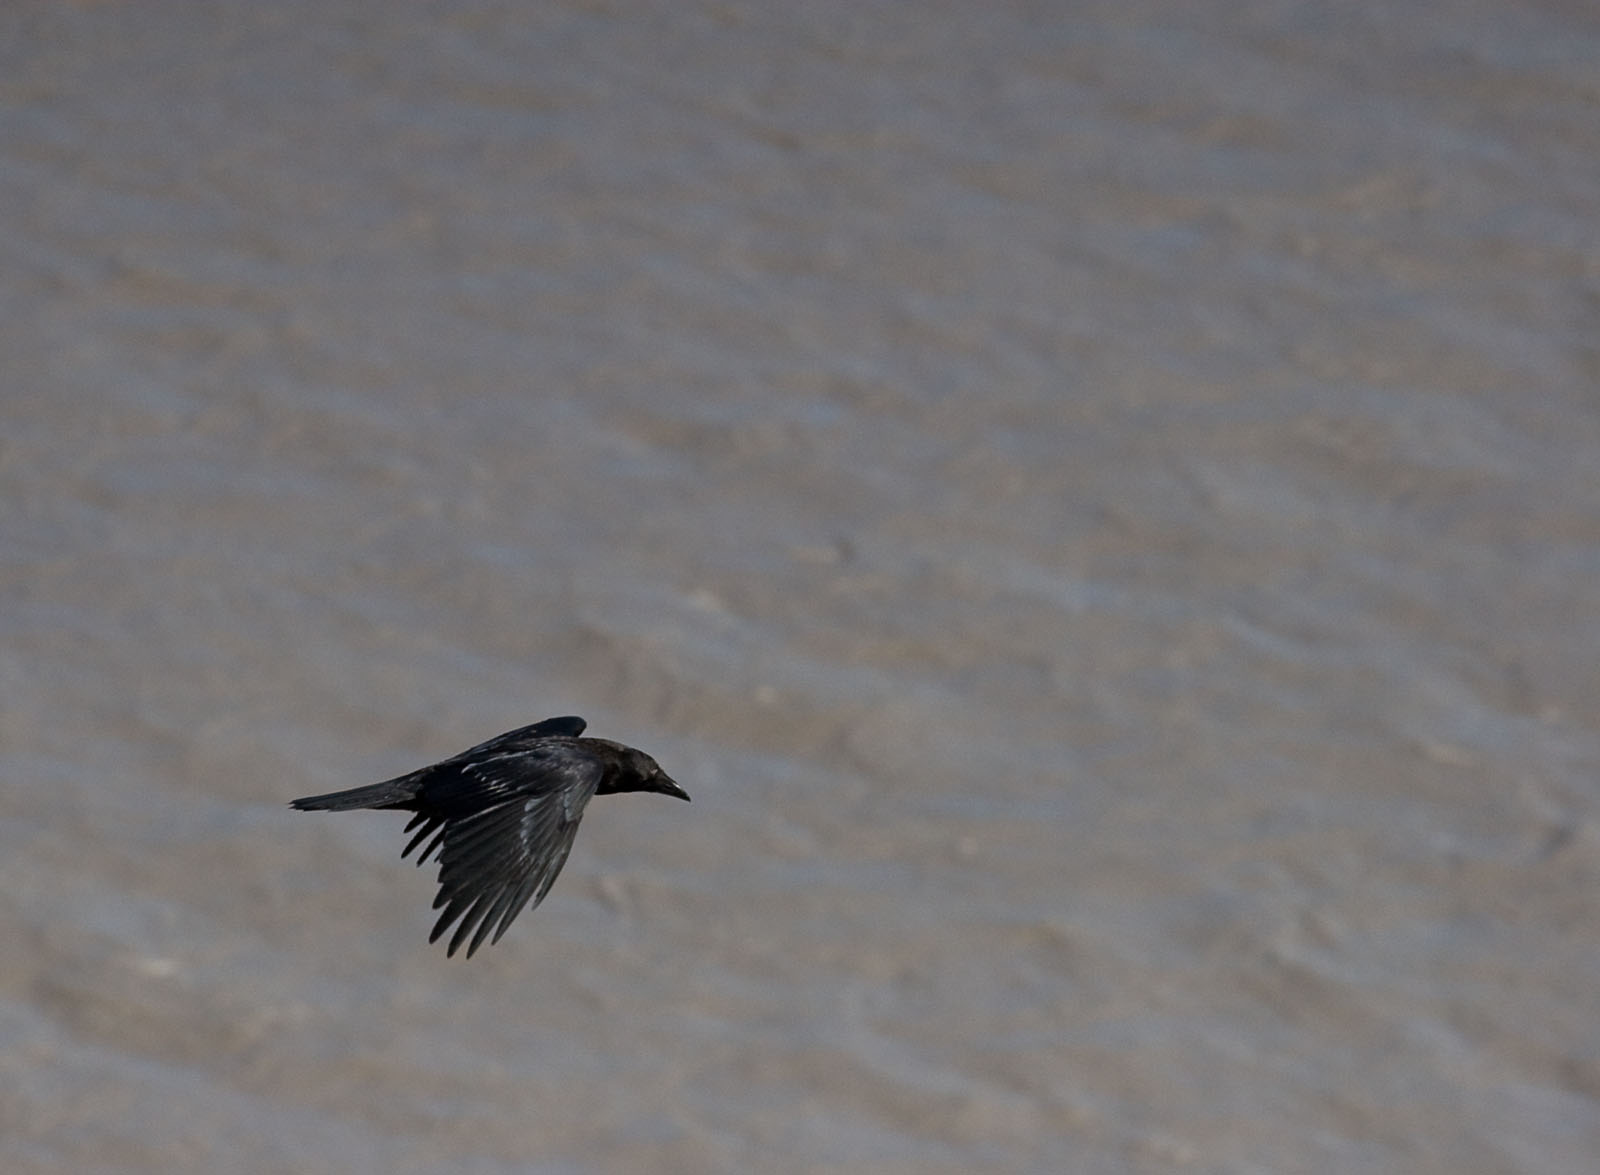 A raven flies over the Copper River. From the Copper River in Alaska.